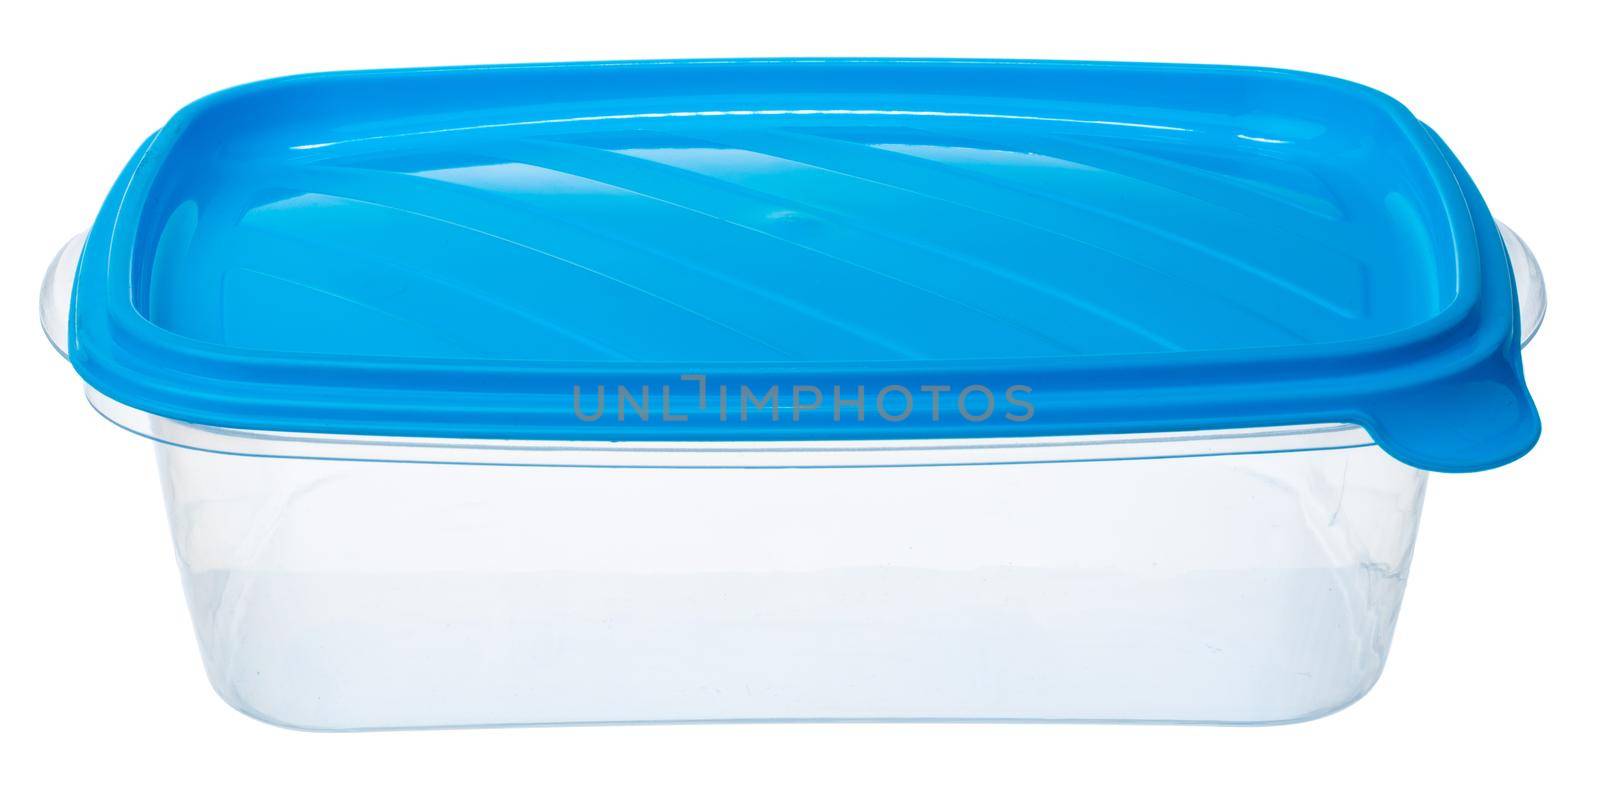 Plastic storage container for food isolated on white background